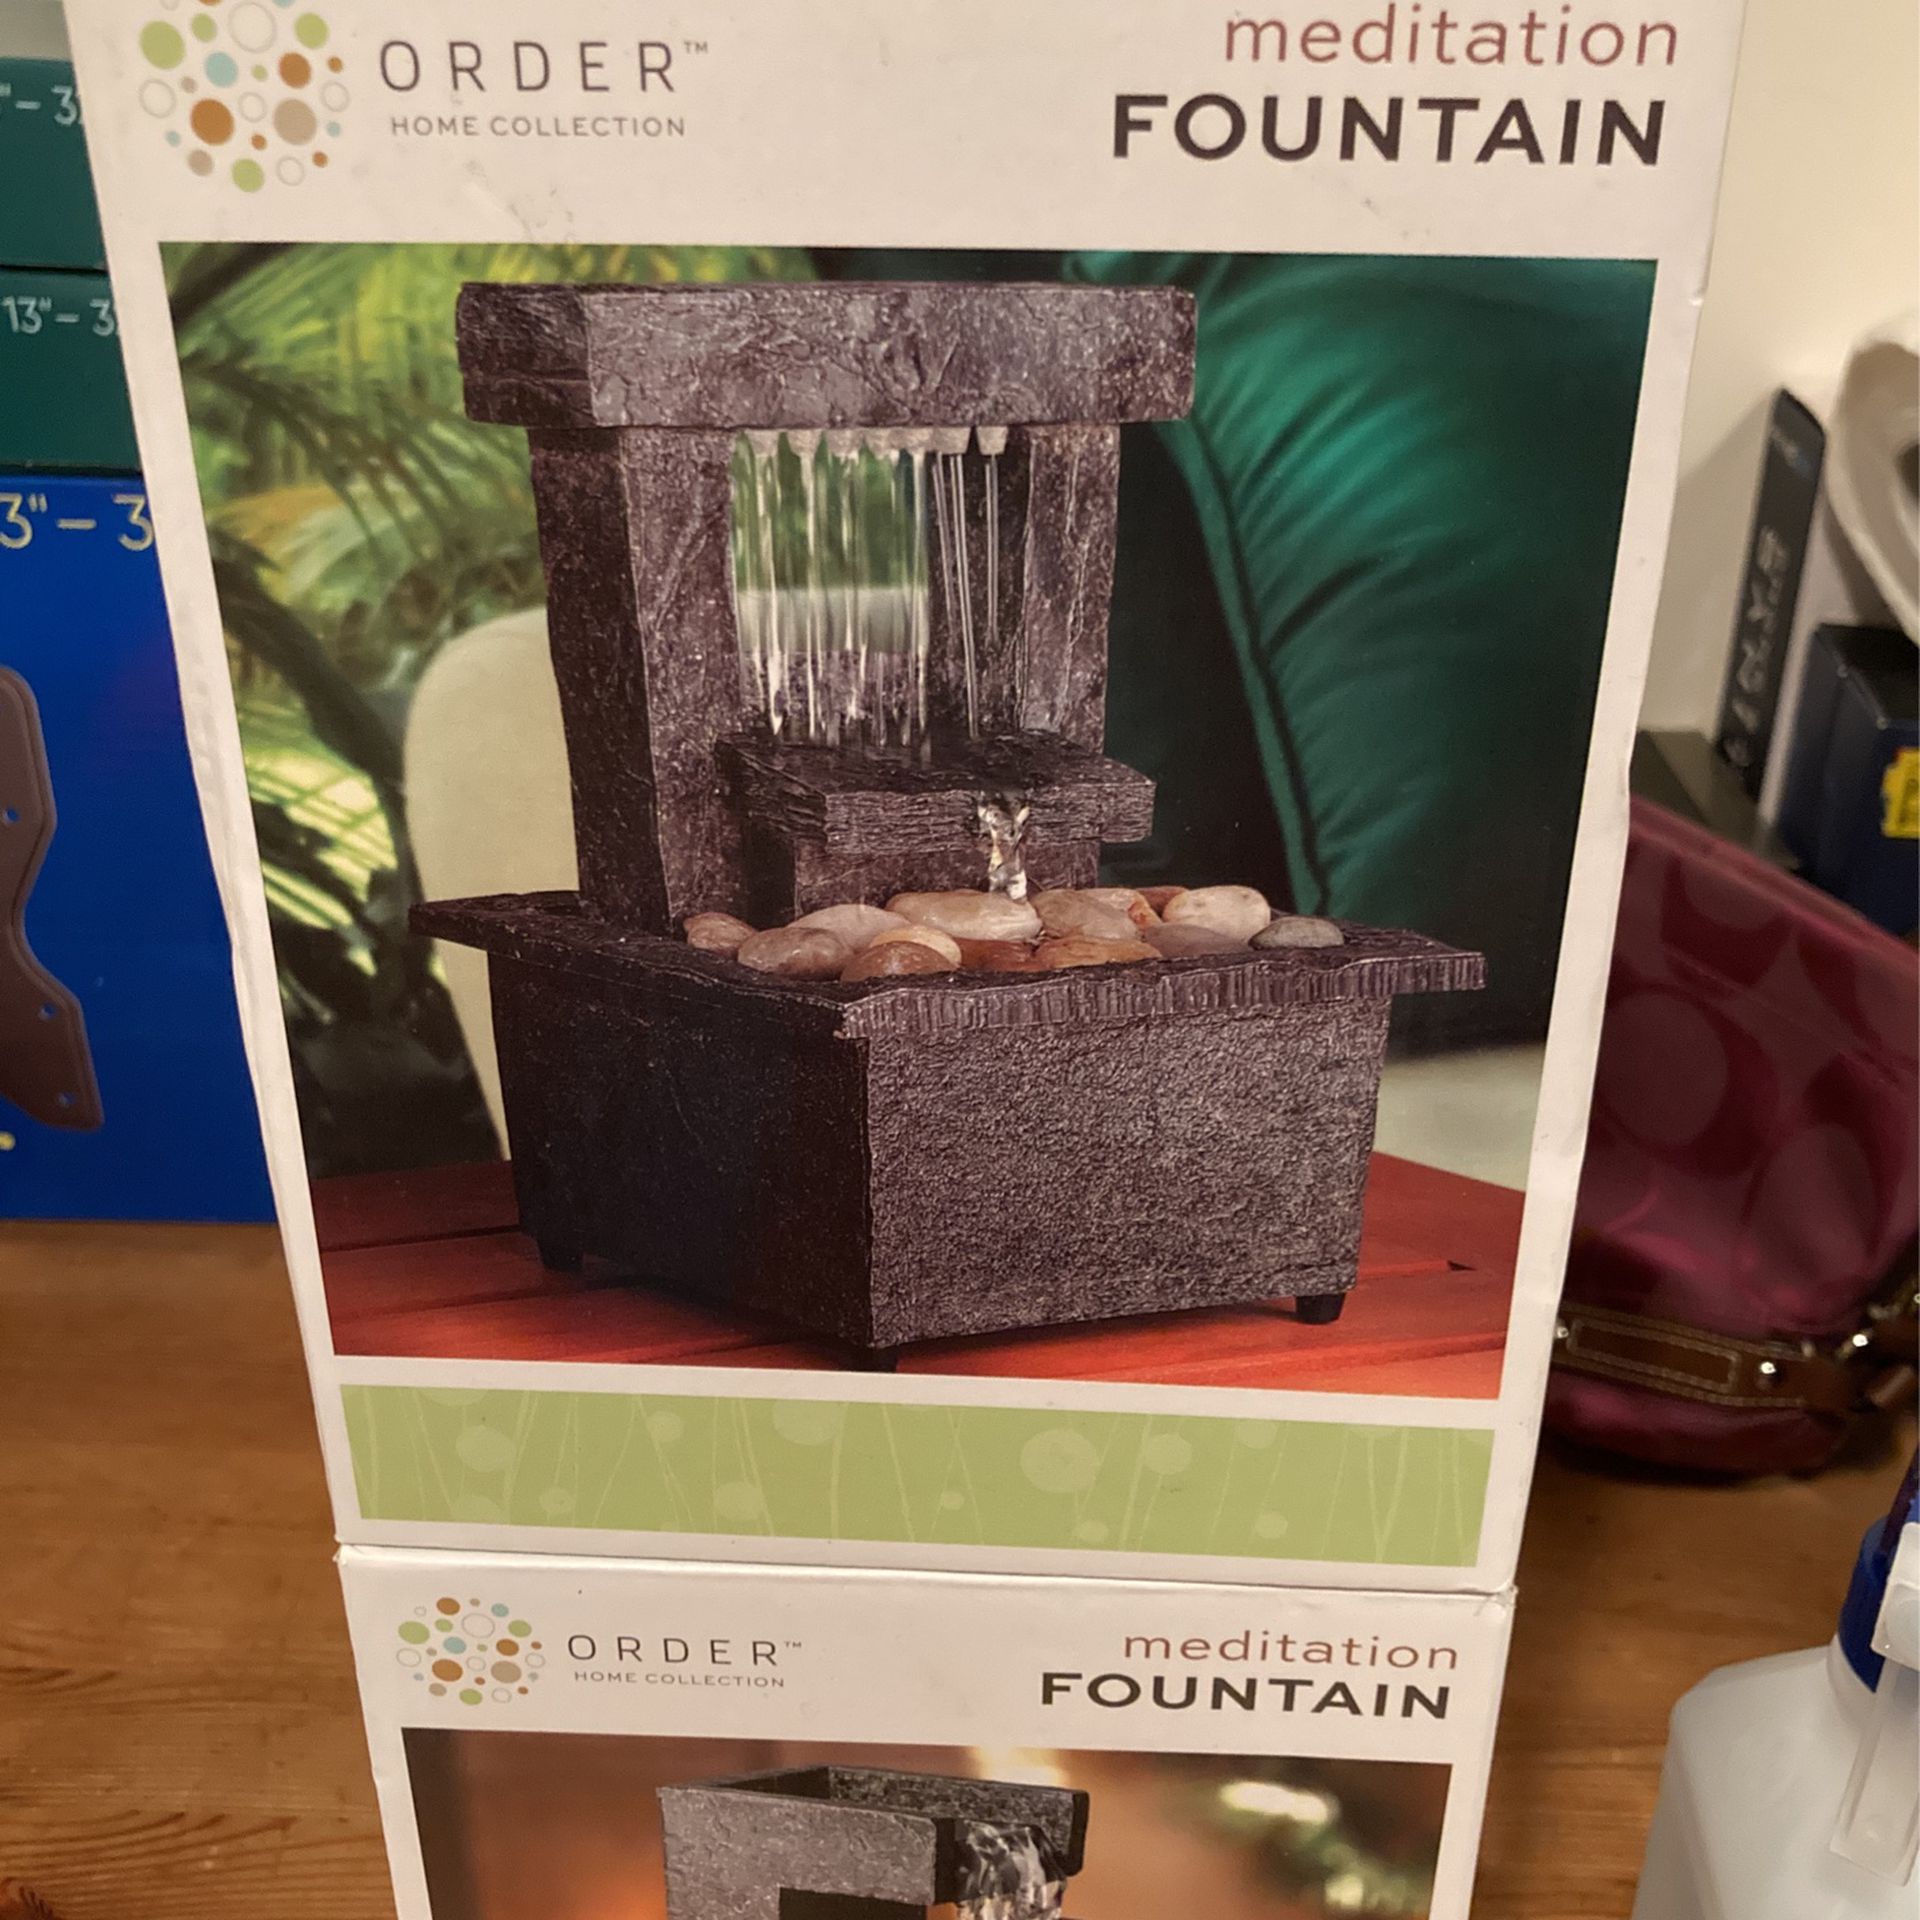 Meditation Fountain    Order Home Collection